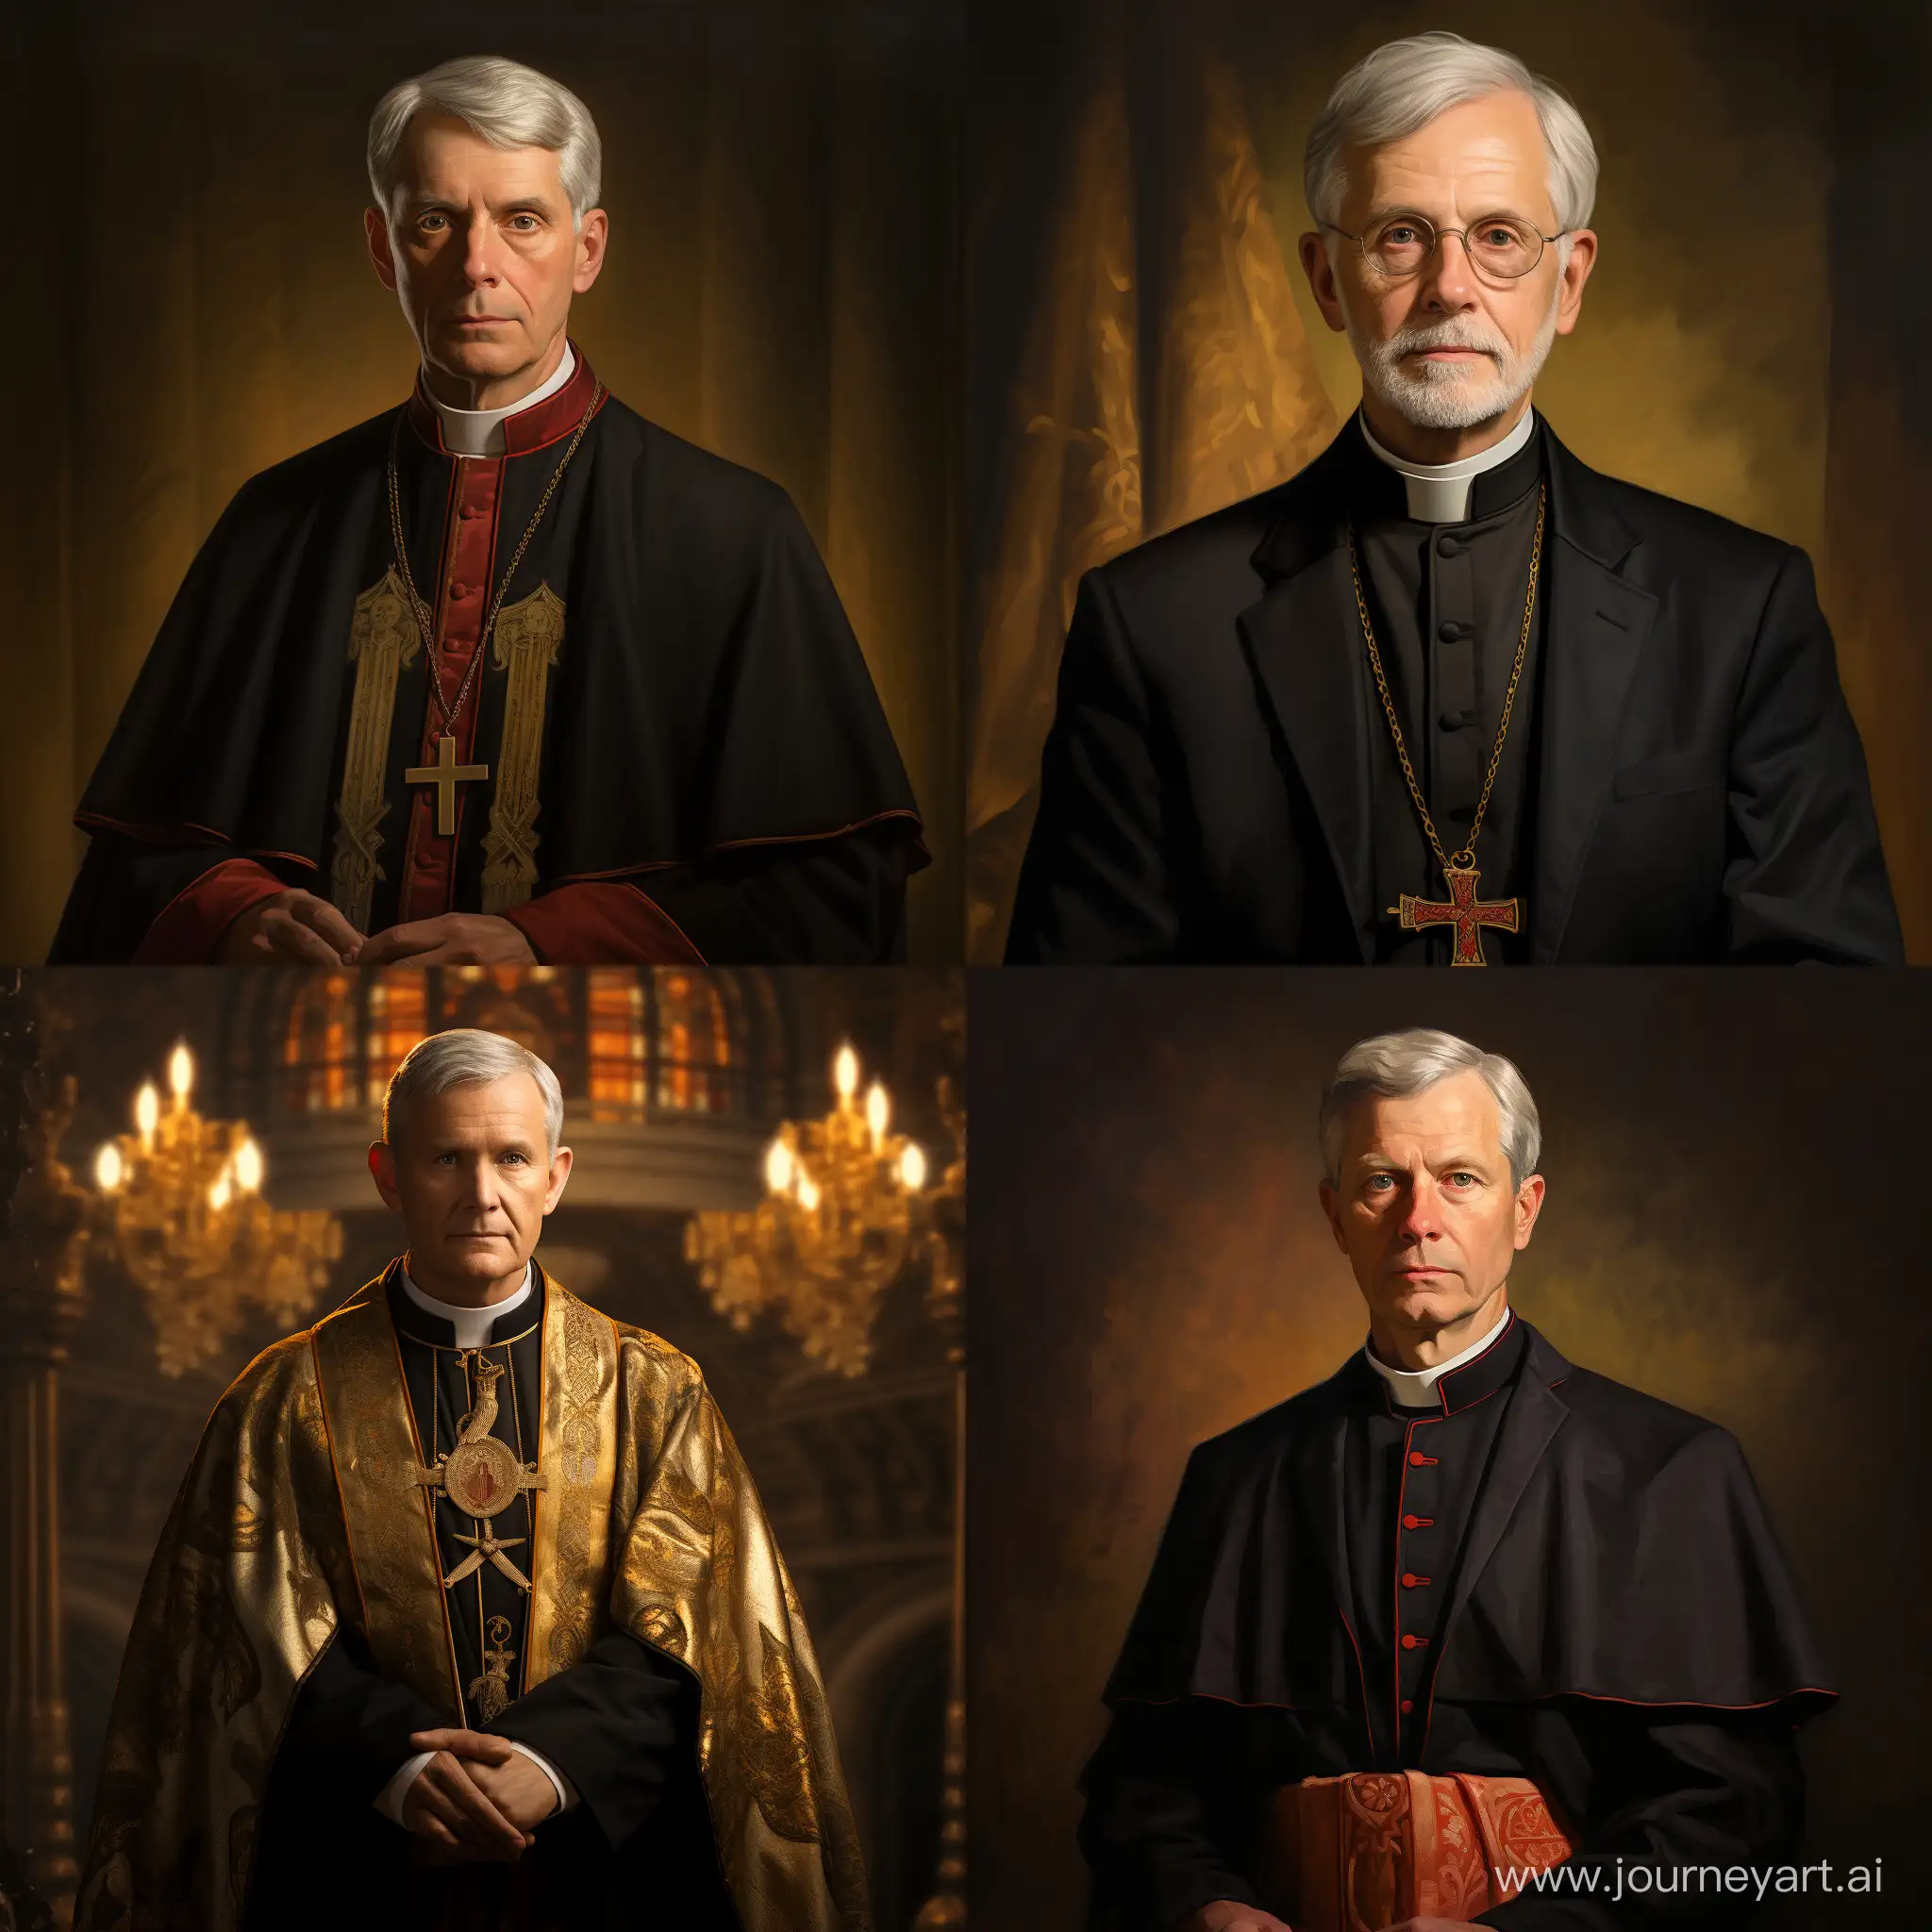 Sophisticated-SilverHaired-Young-Bishop-in-Regal-Ecclesiastical-Attire